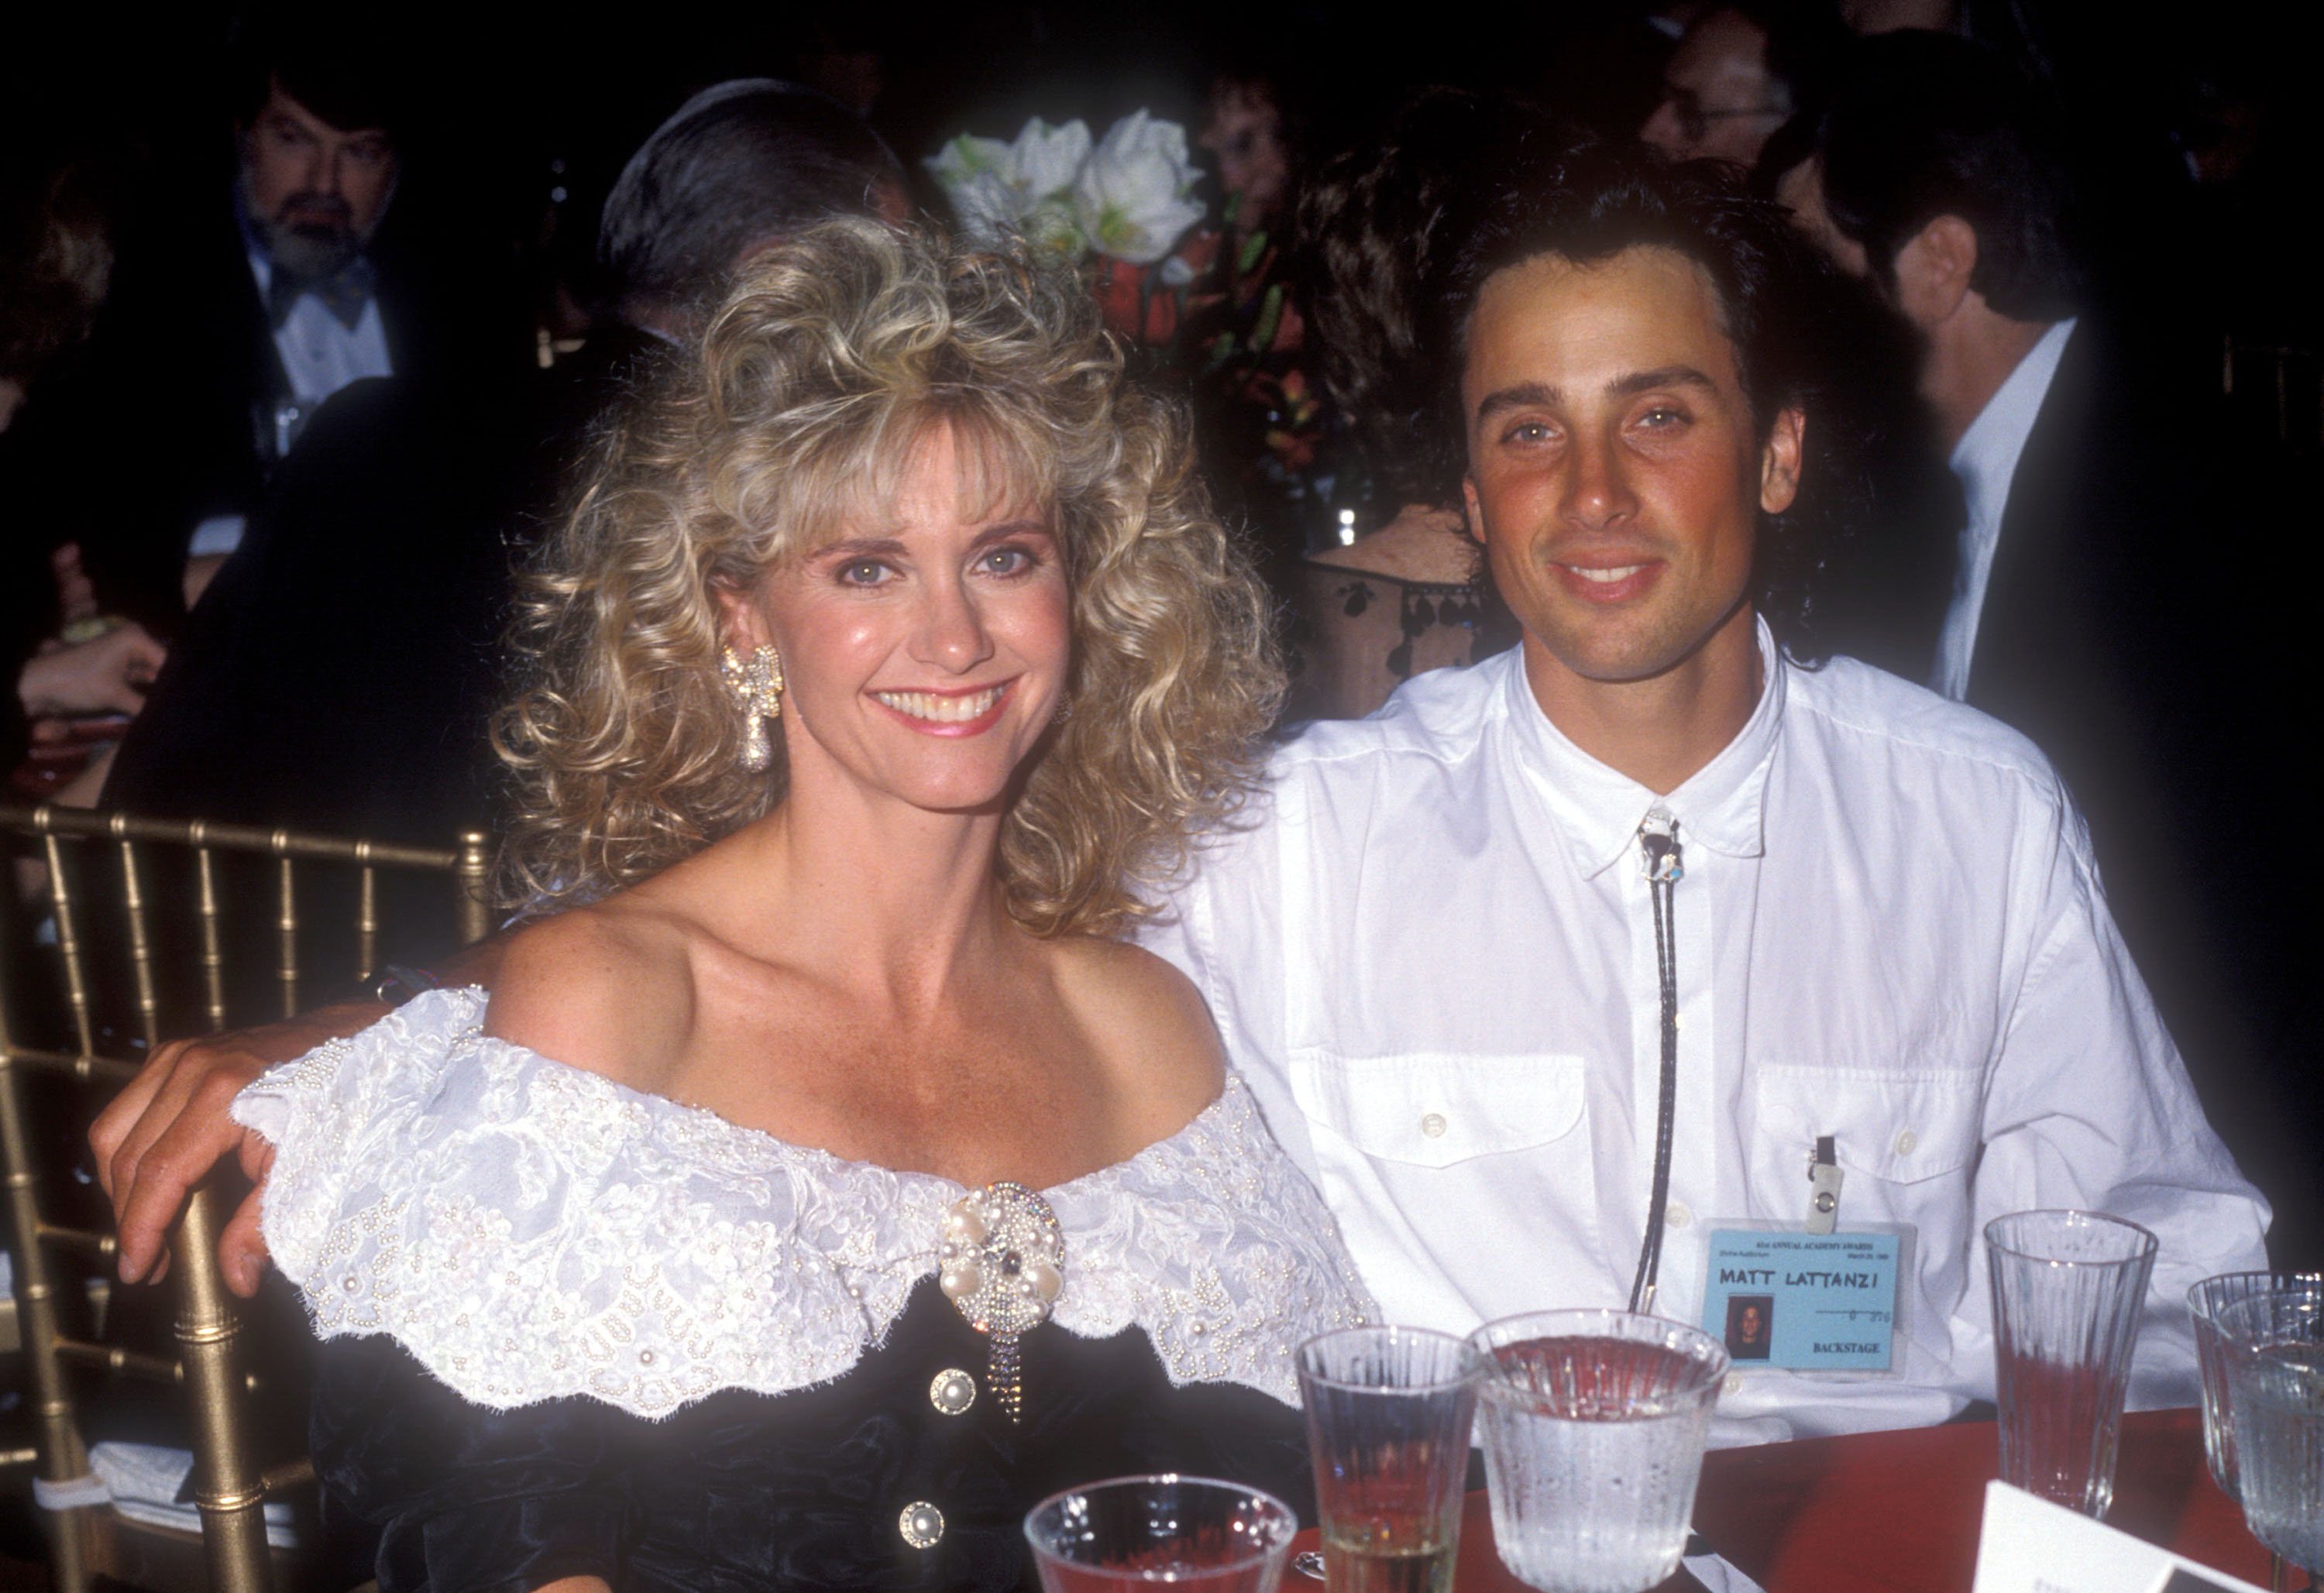 Olivia Newton-John and Matt Lattanzi at the 61st Annual Academy Awards - Governor's Ball in Los Angeles, California, on March 29, 1989. | Source: Getty Images